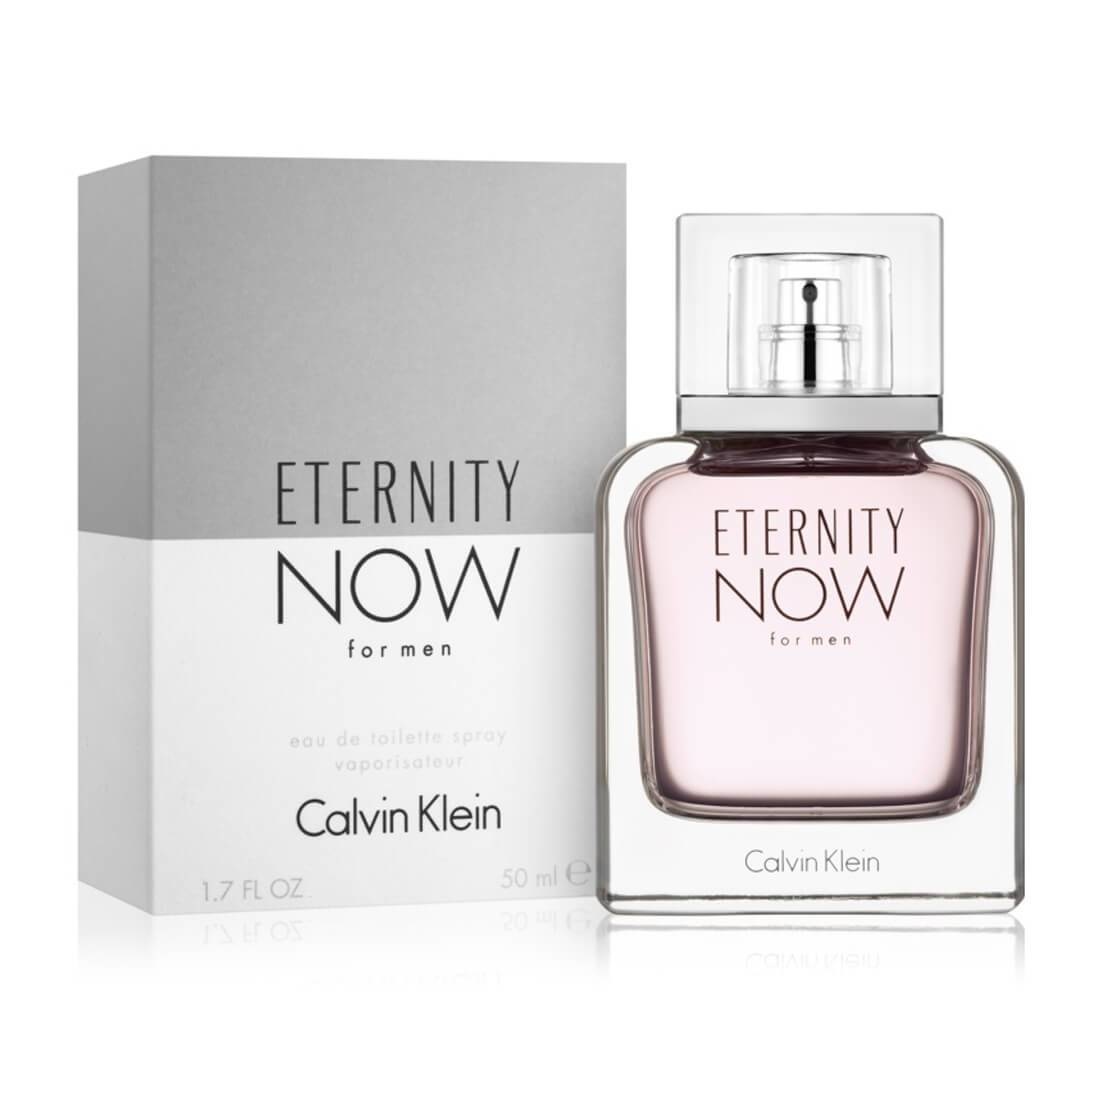 Calvin Klein Scent for - - EdT Eternity Men Now Masters The